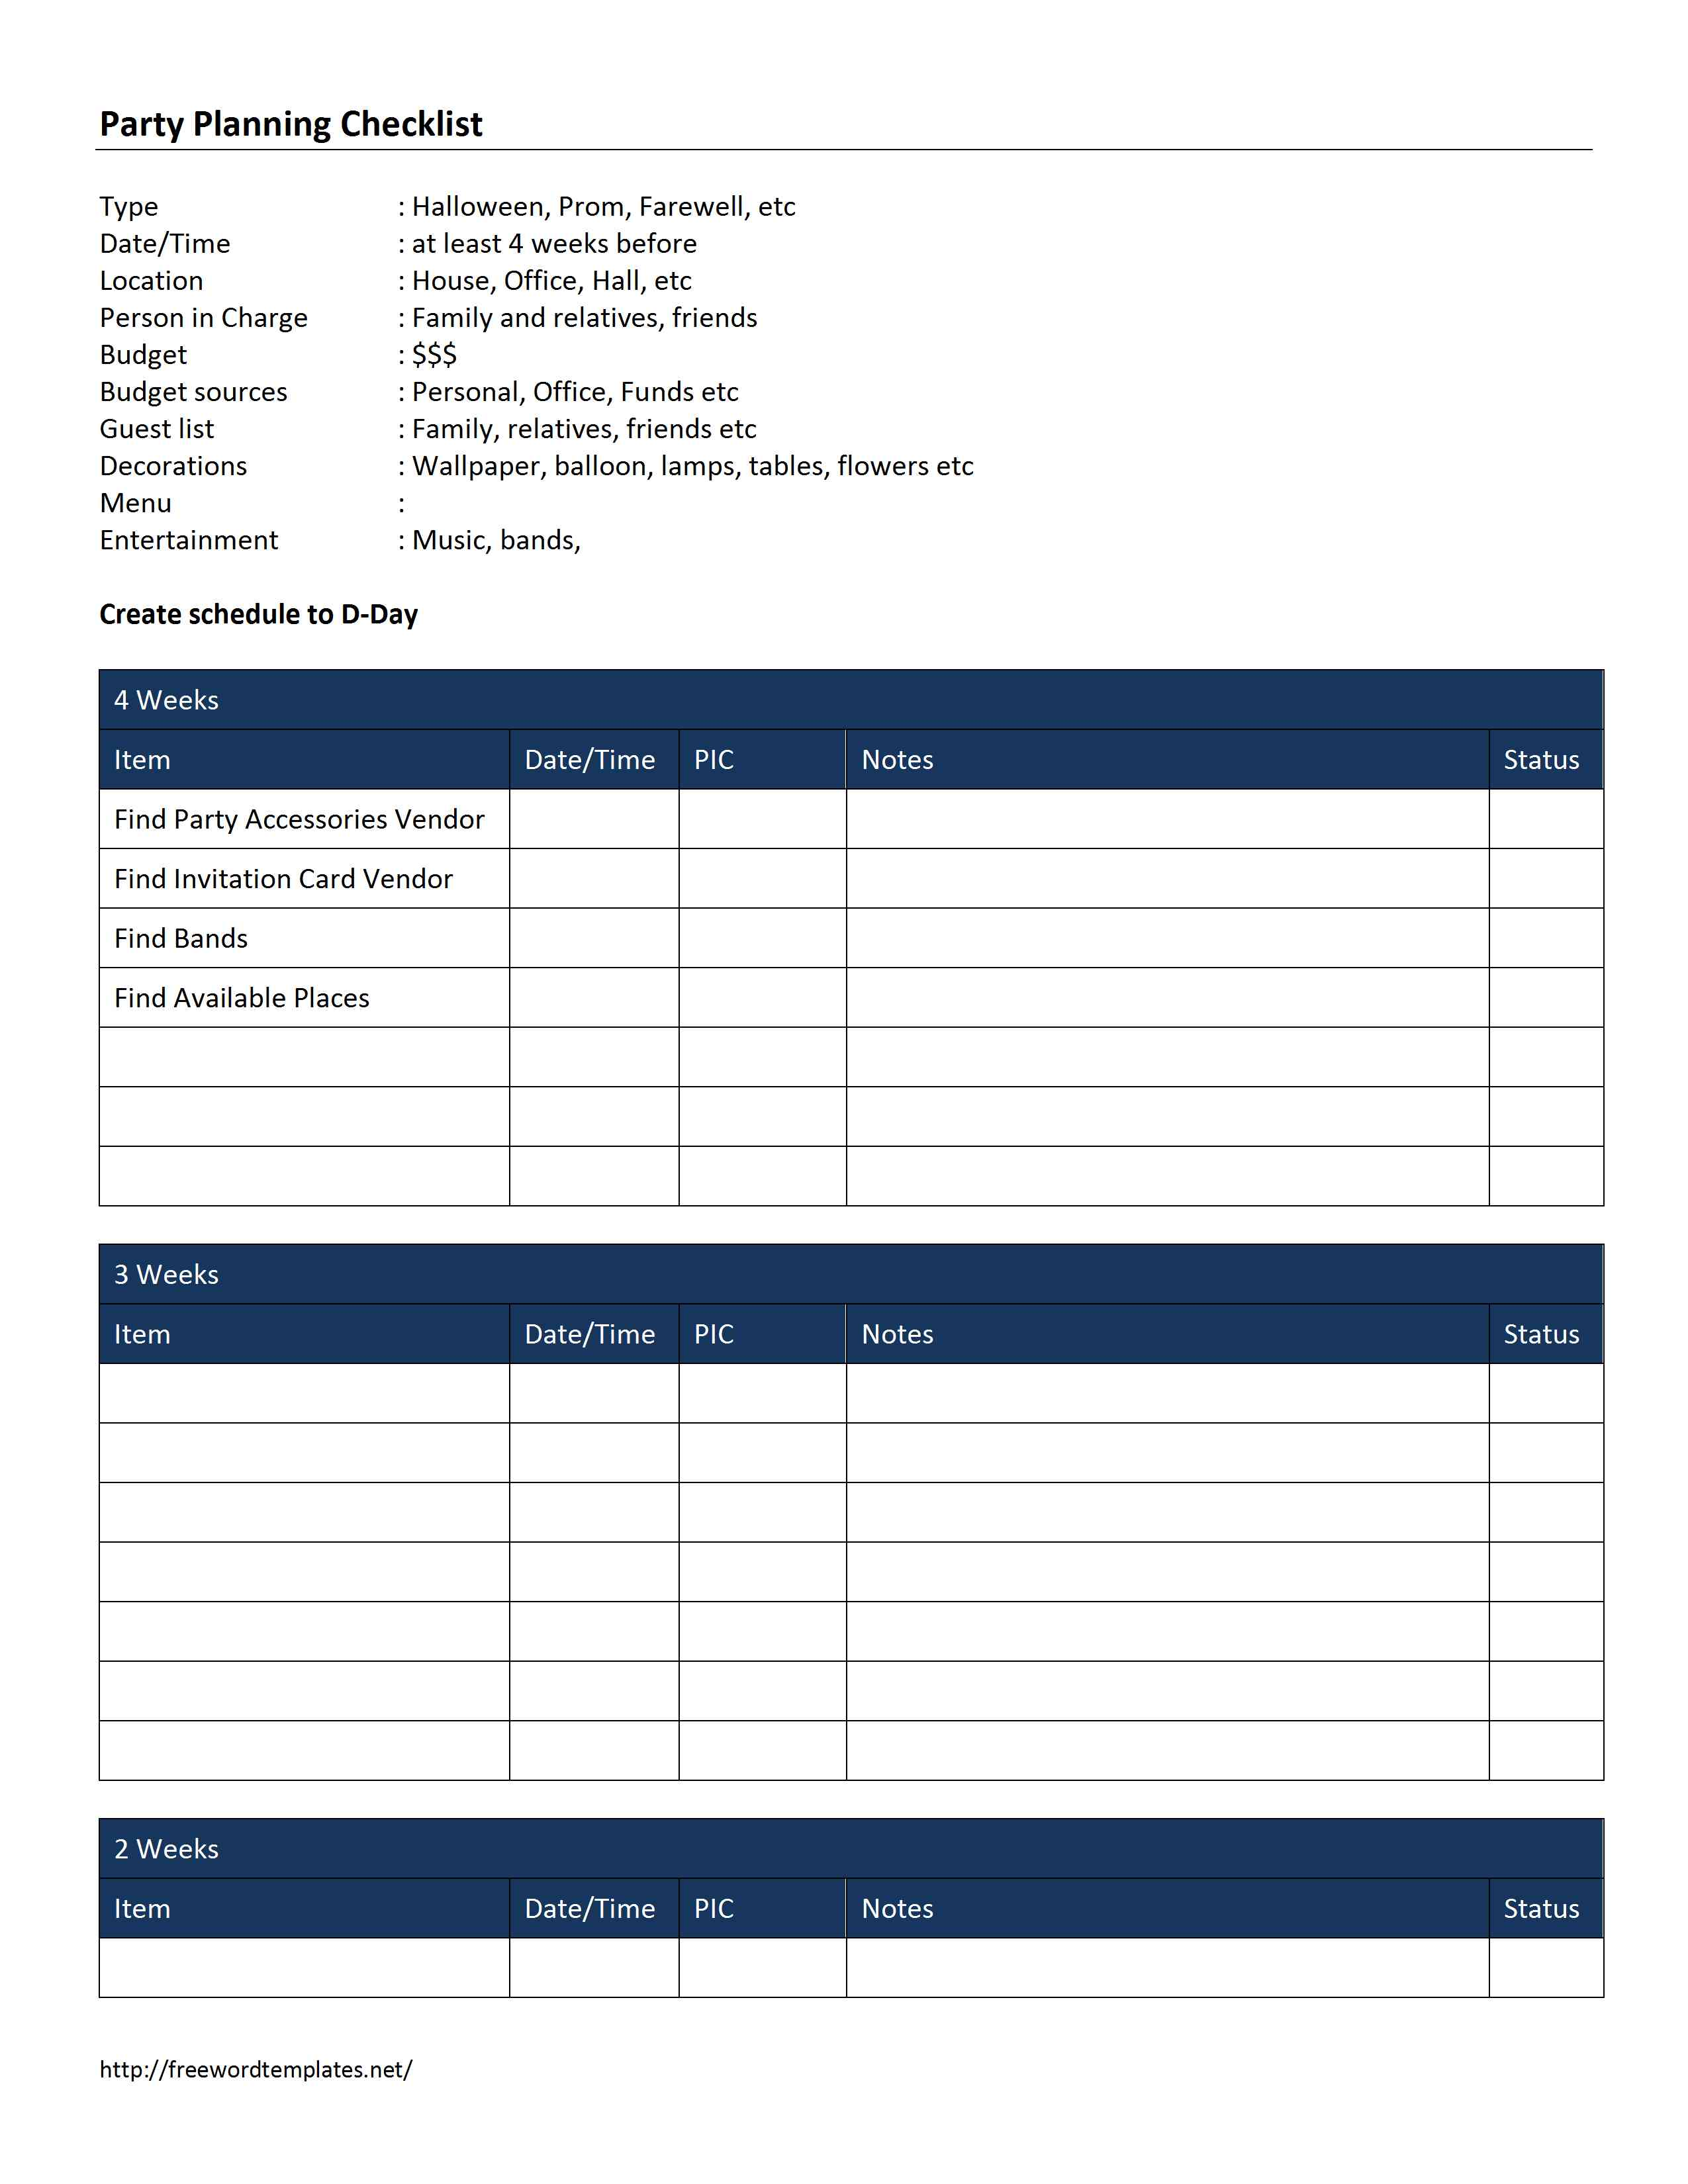 Party Planning Google Sheet Template